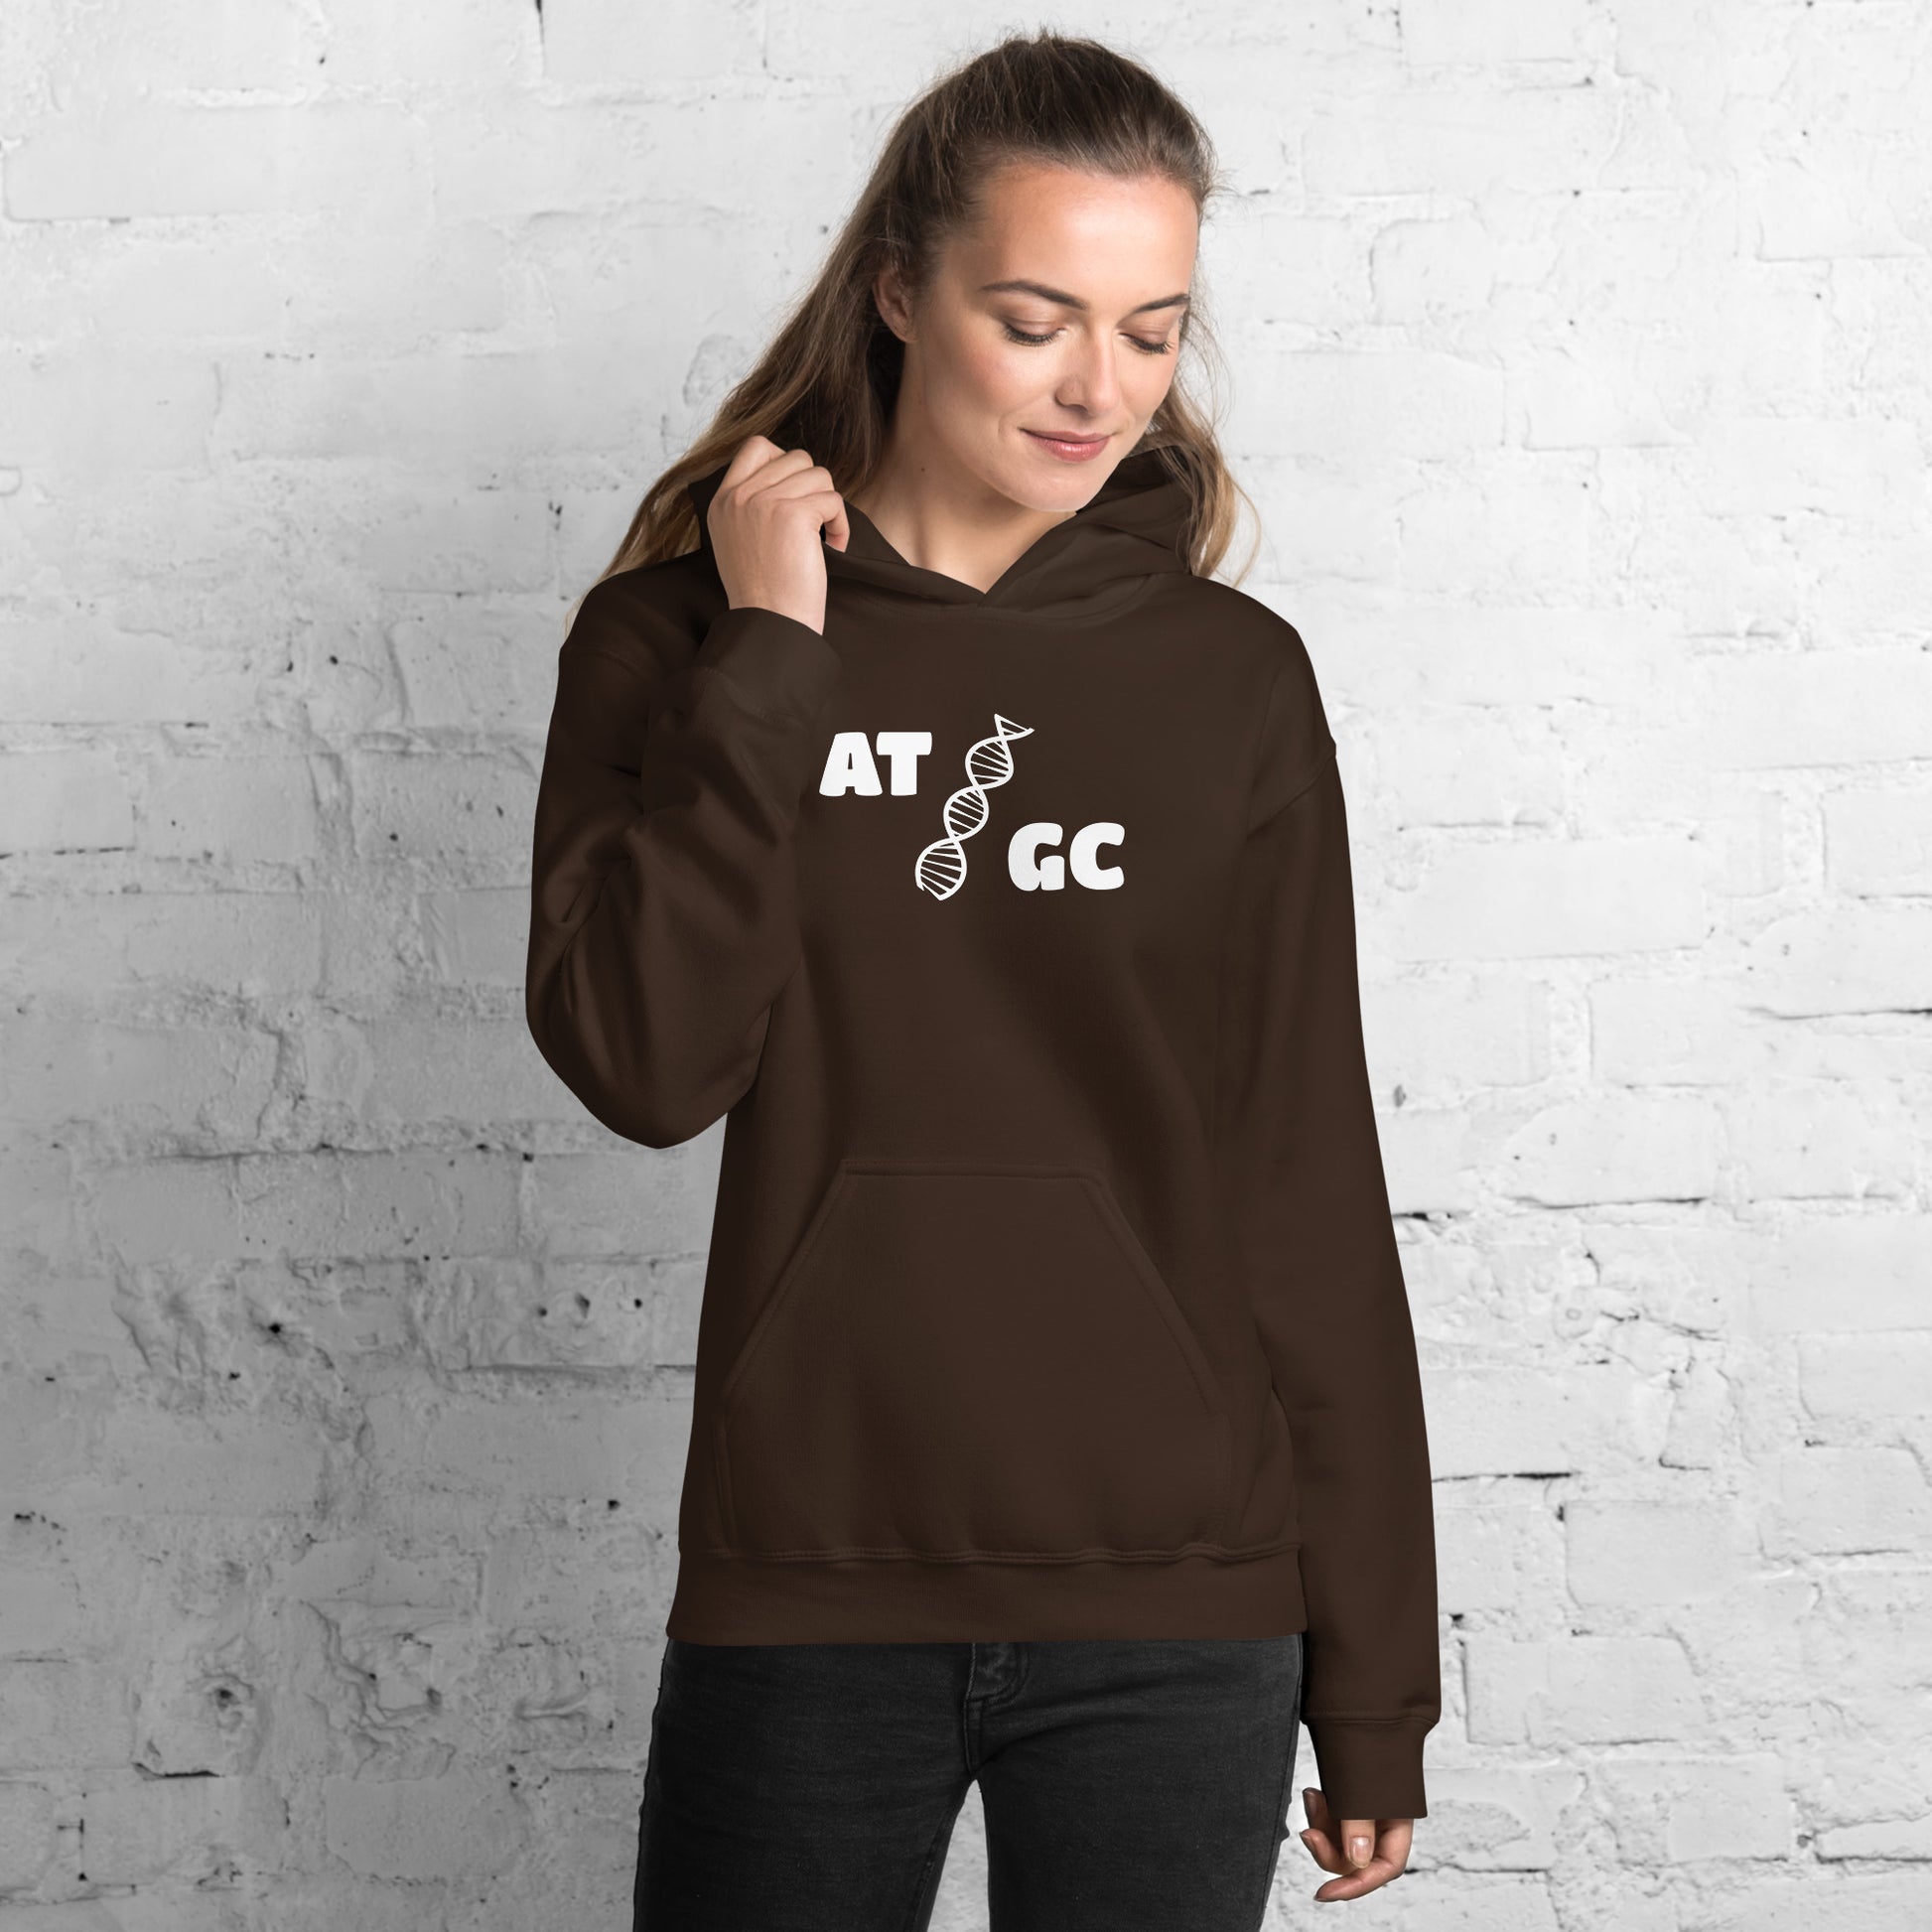 Women with dark brown hoodie with image of a DNA string and the text "ATGC"